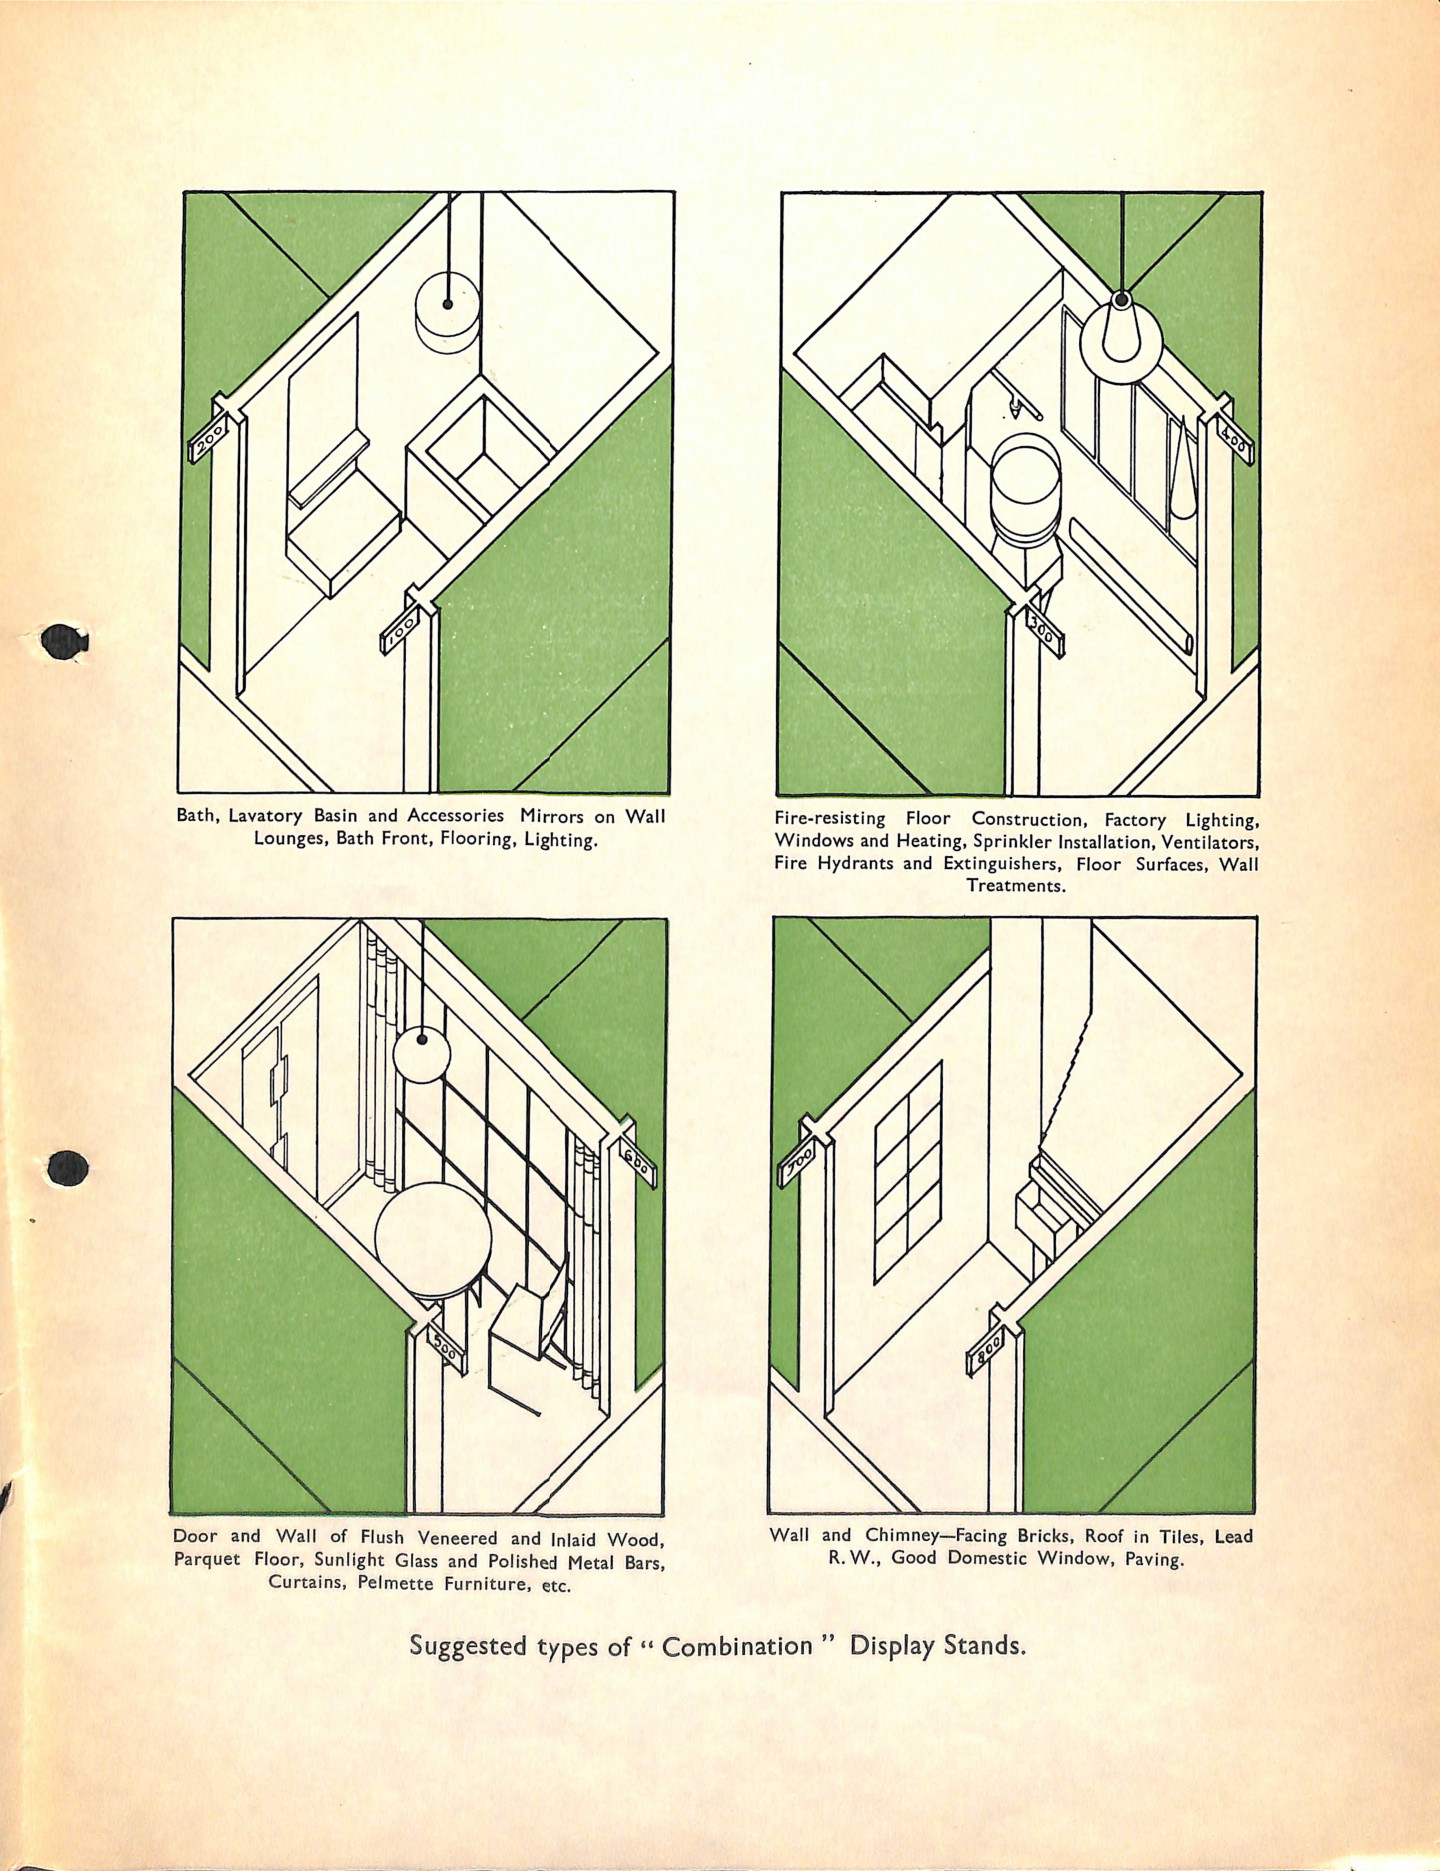 Plan for display stands for materials and products, 1932